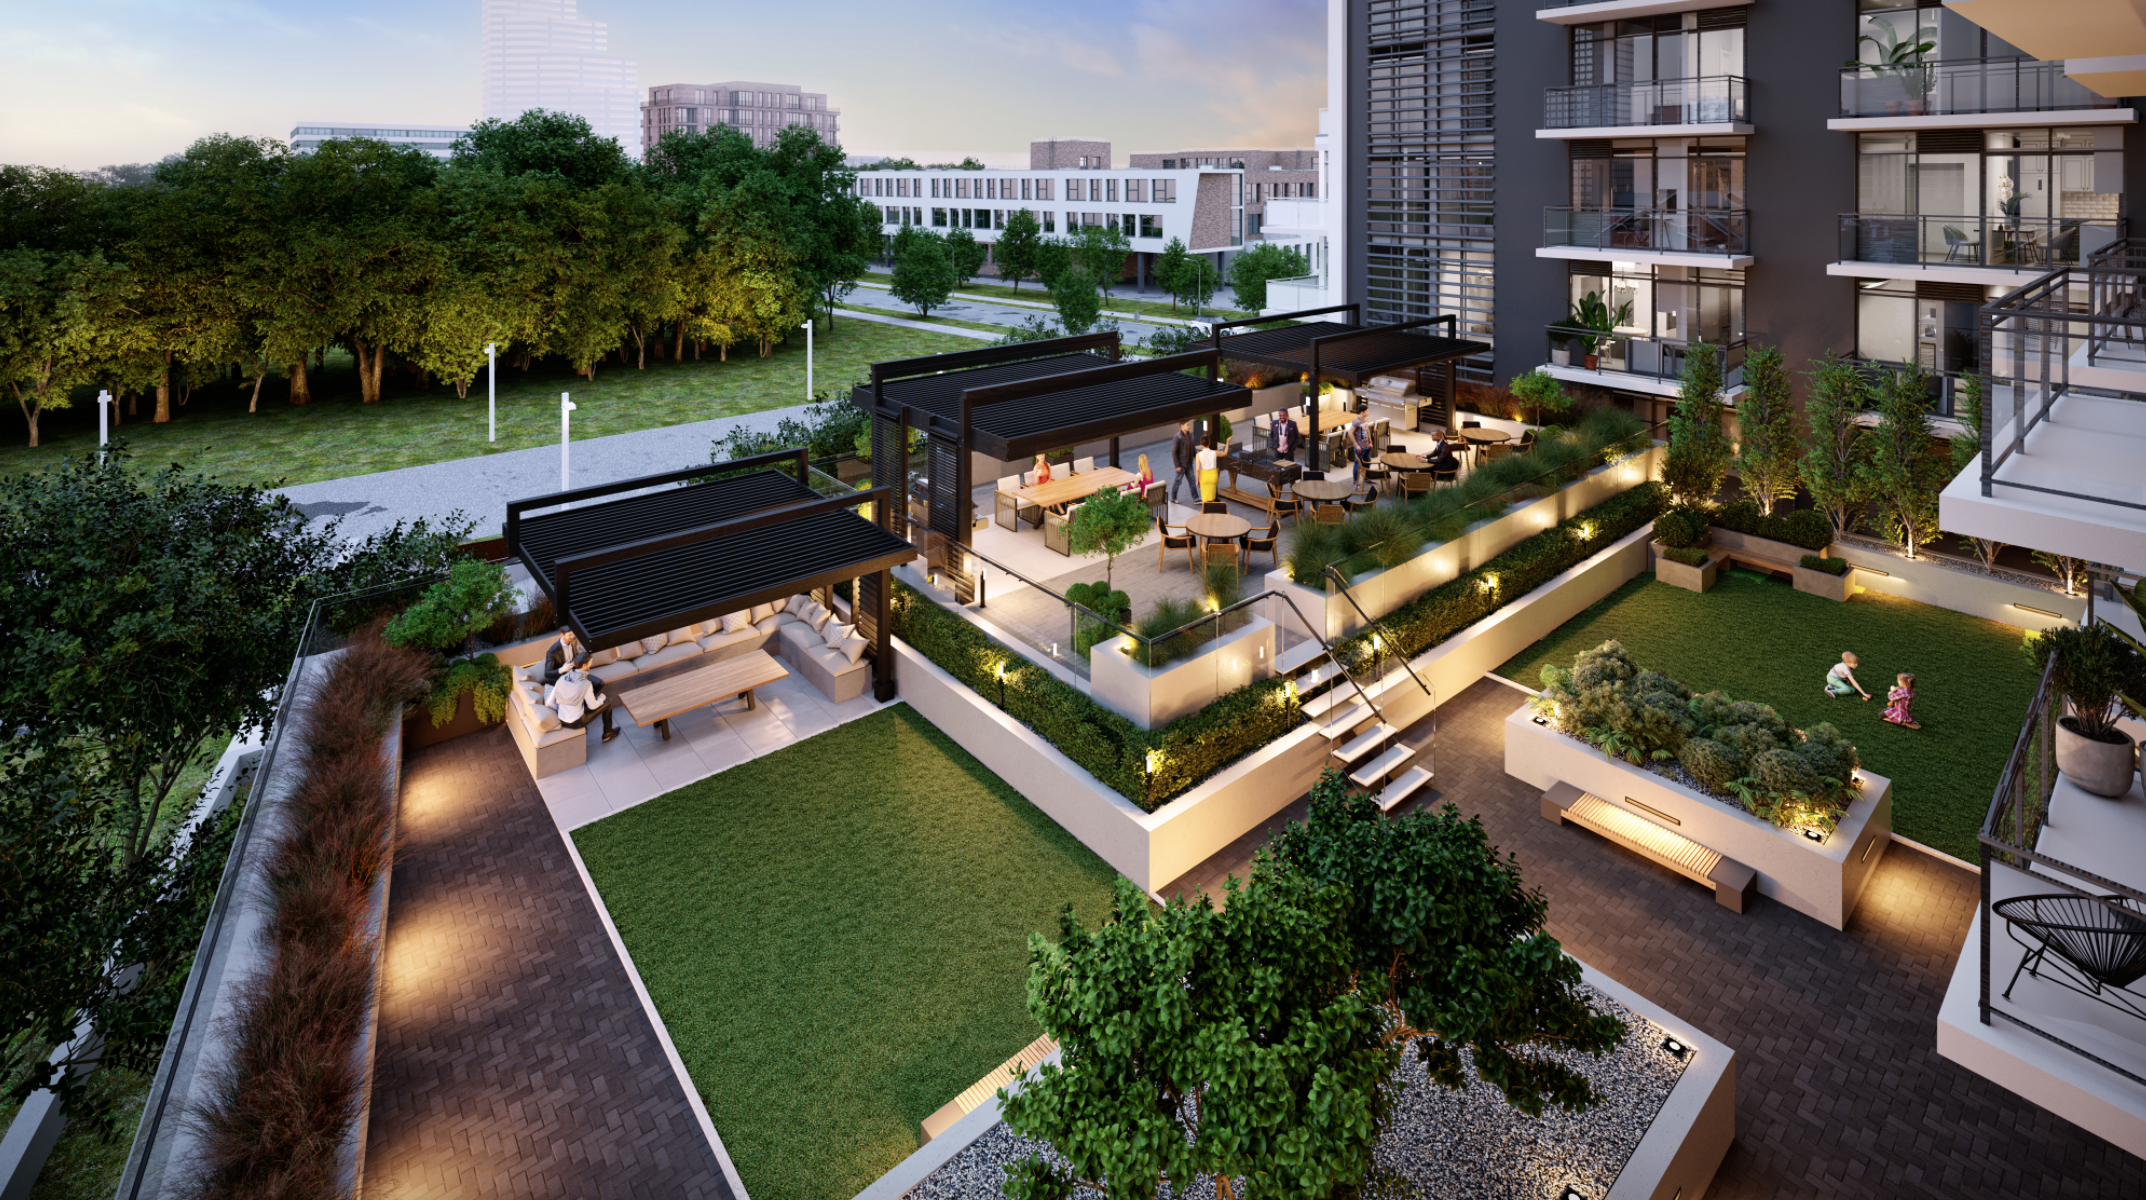 Outdoor amenity space at Yorkwoods Condos, image courtesy of CTN Developments